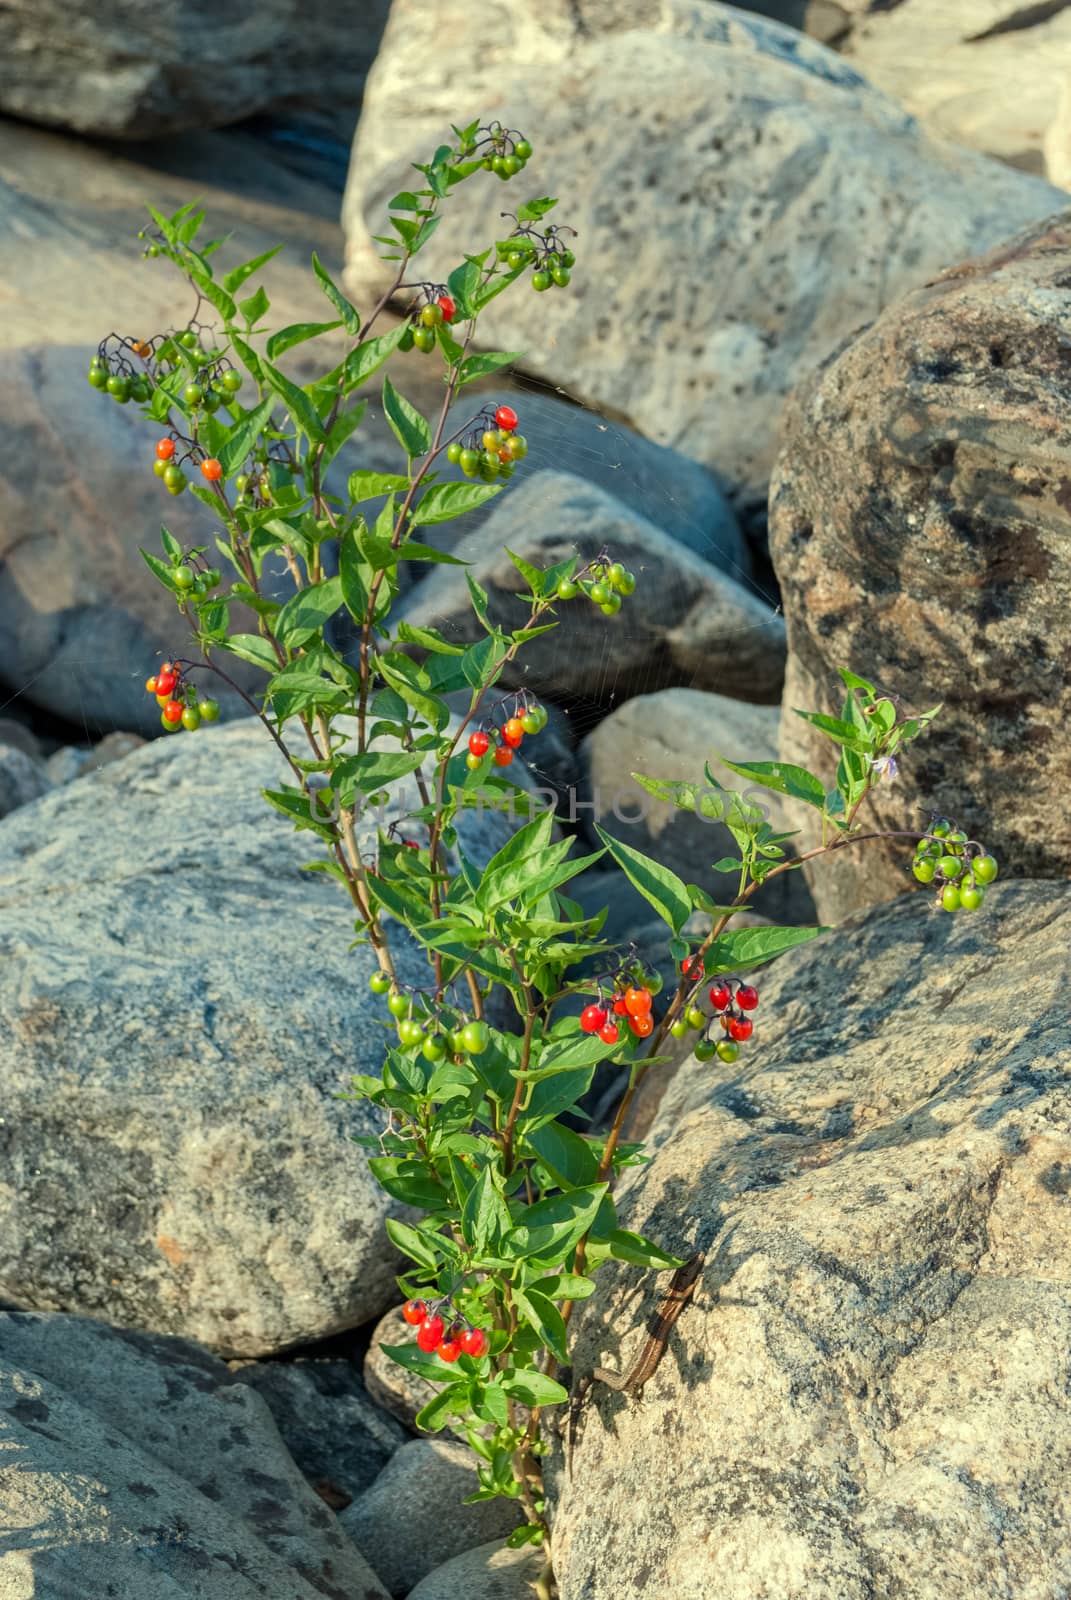 A bush with red berries growing among the large gray stones on a bright sunny day.